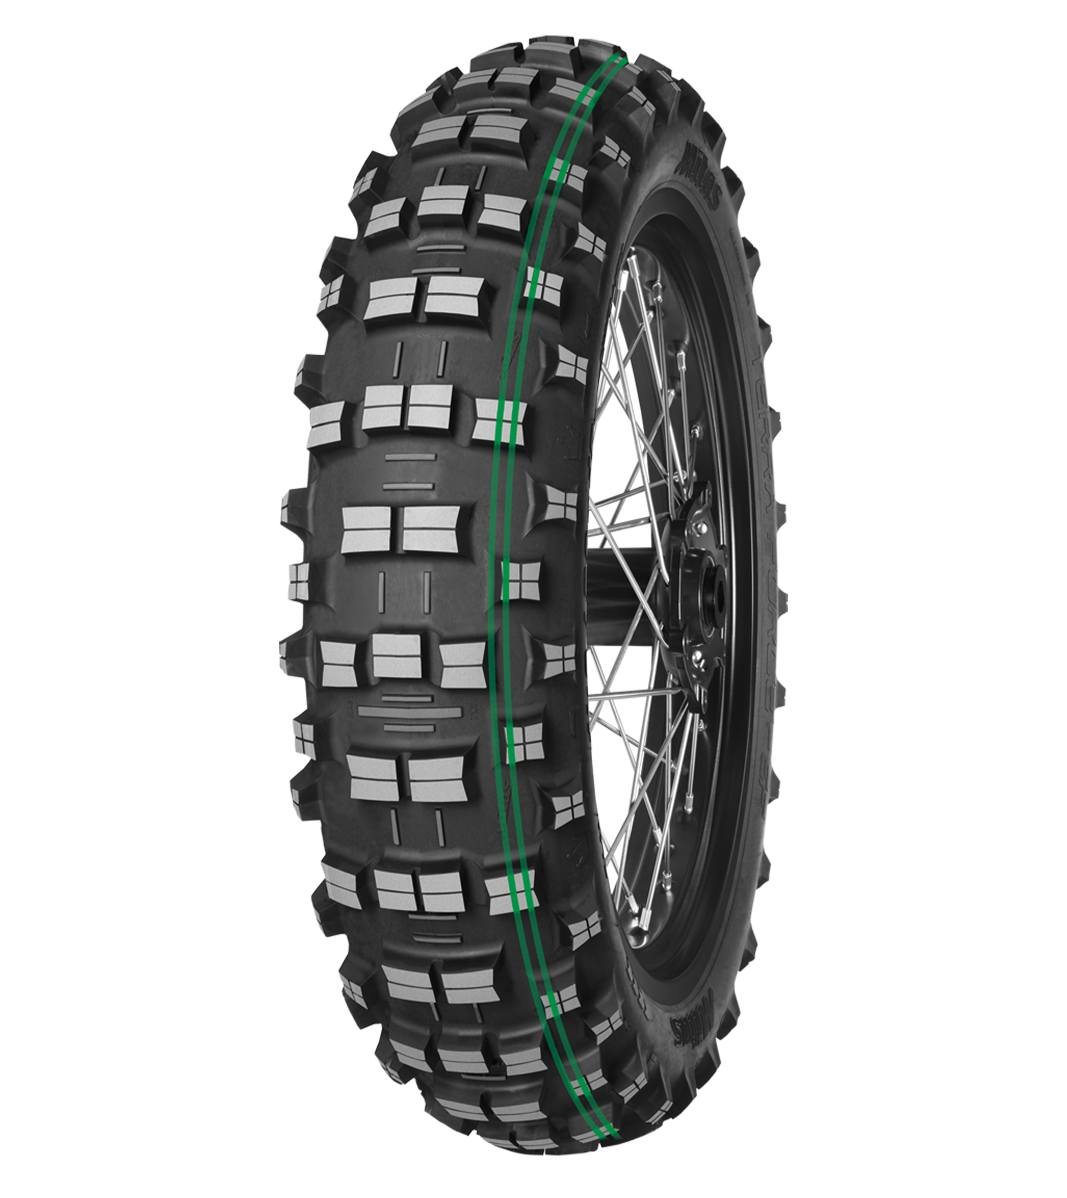 Mitas TERRA FORCE-EH 140/80-18 Enduro Competition Off-Road SUPER SOFT EXTREME 70M 2 Green Tube Rear Tire, 226285, 140/80-18, Enduro Competition, Off-Road, Rear, Terra Force, Terra Force-EH, Trail, Tires - Imported and distributed in North & South America by Lindeco Genuine Powersports - Premier Powersports Equipment and Accessories for Motorcycle Enthusiasts, Professional Riders and Dealers.